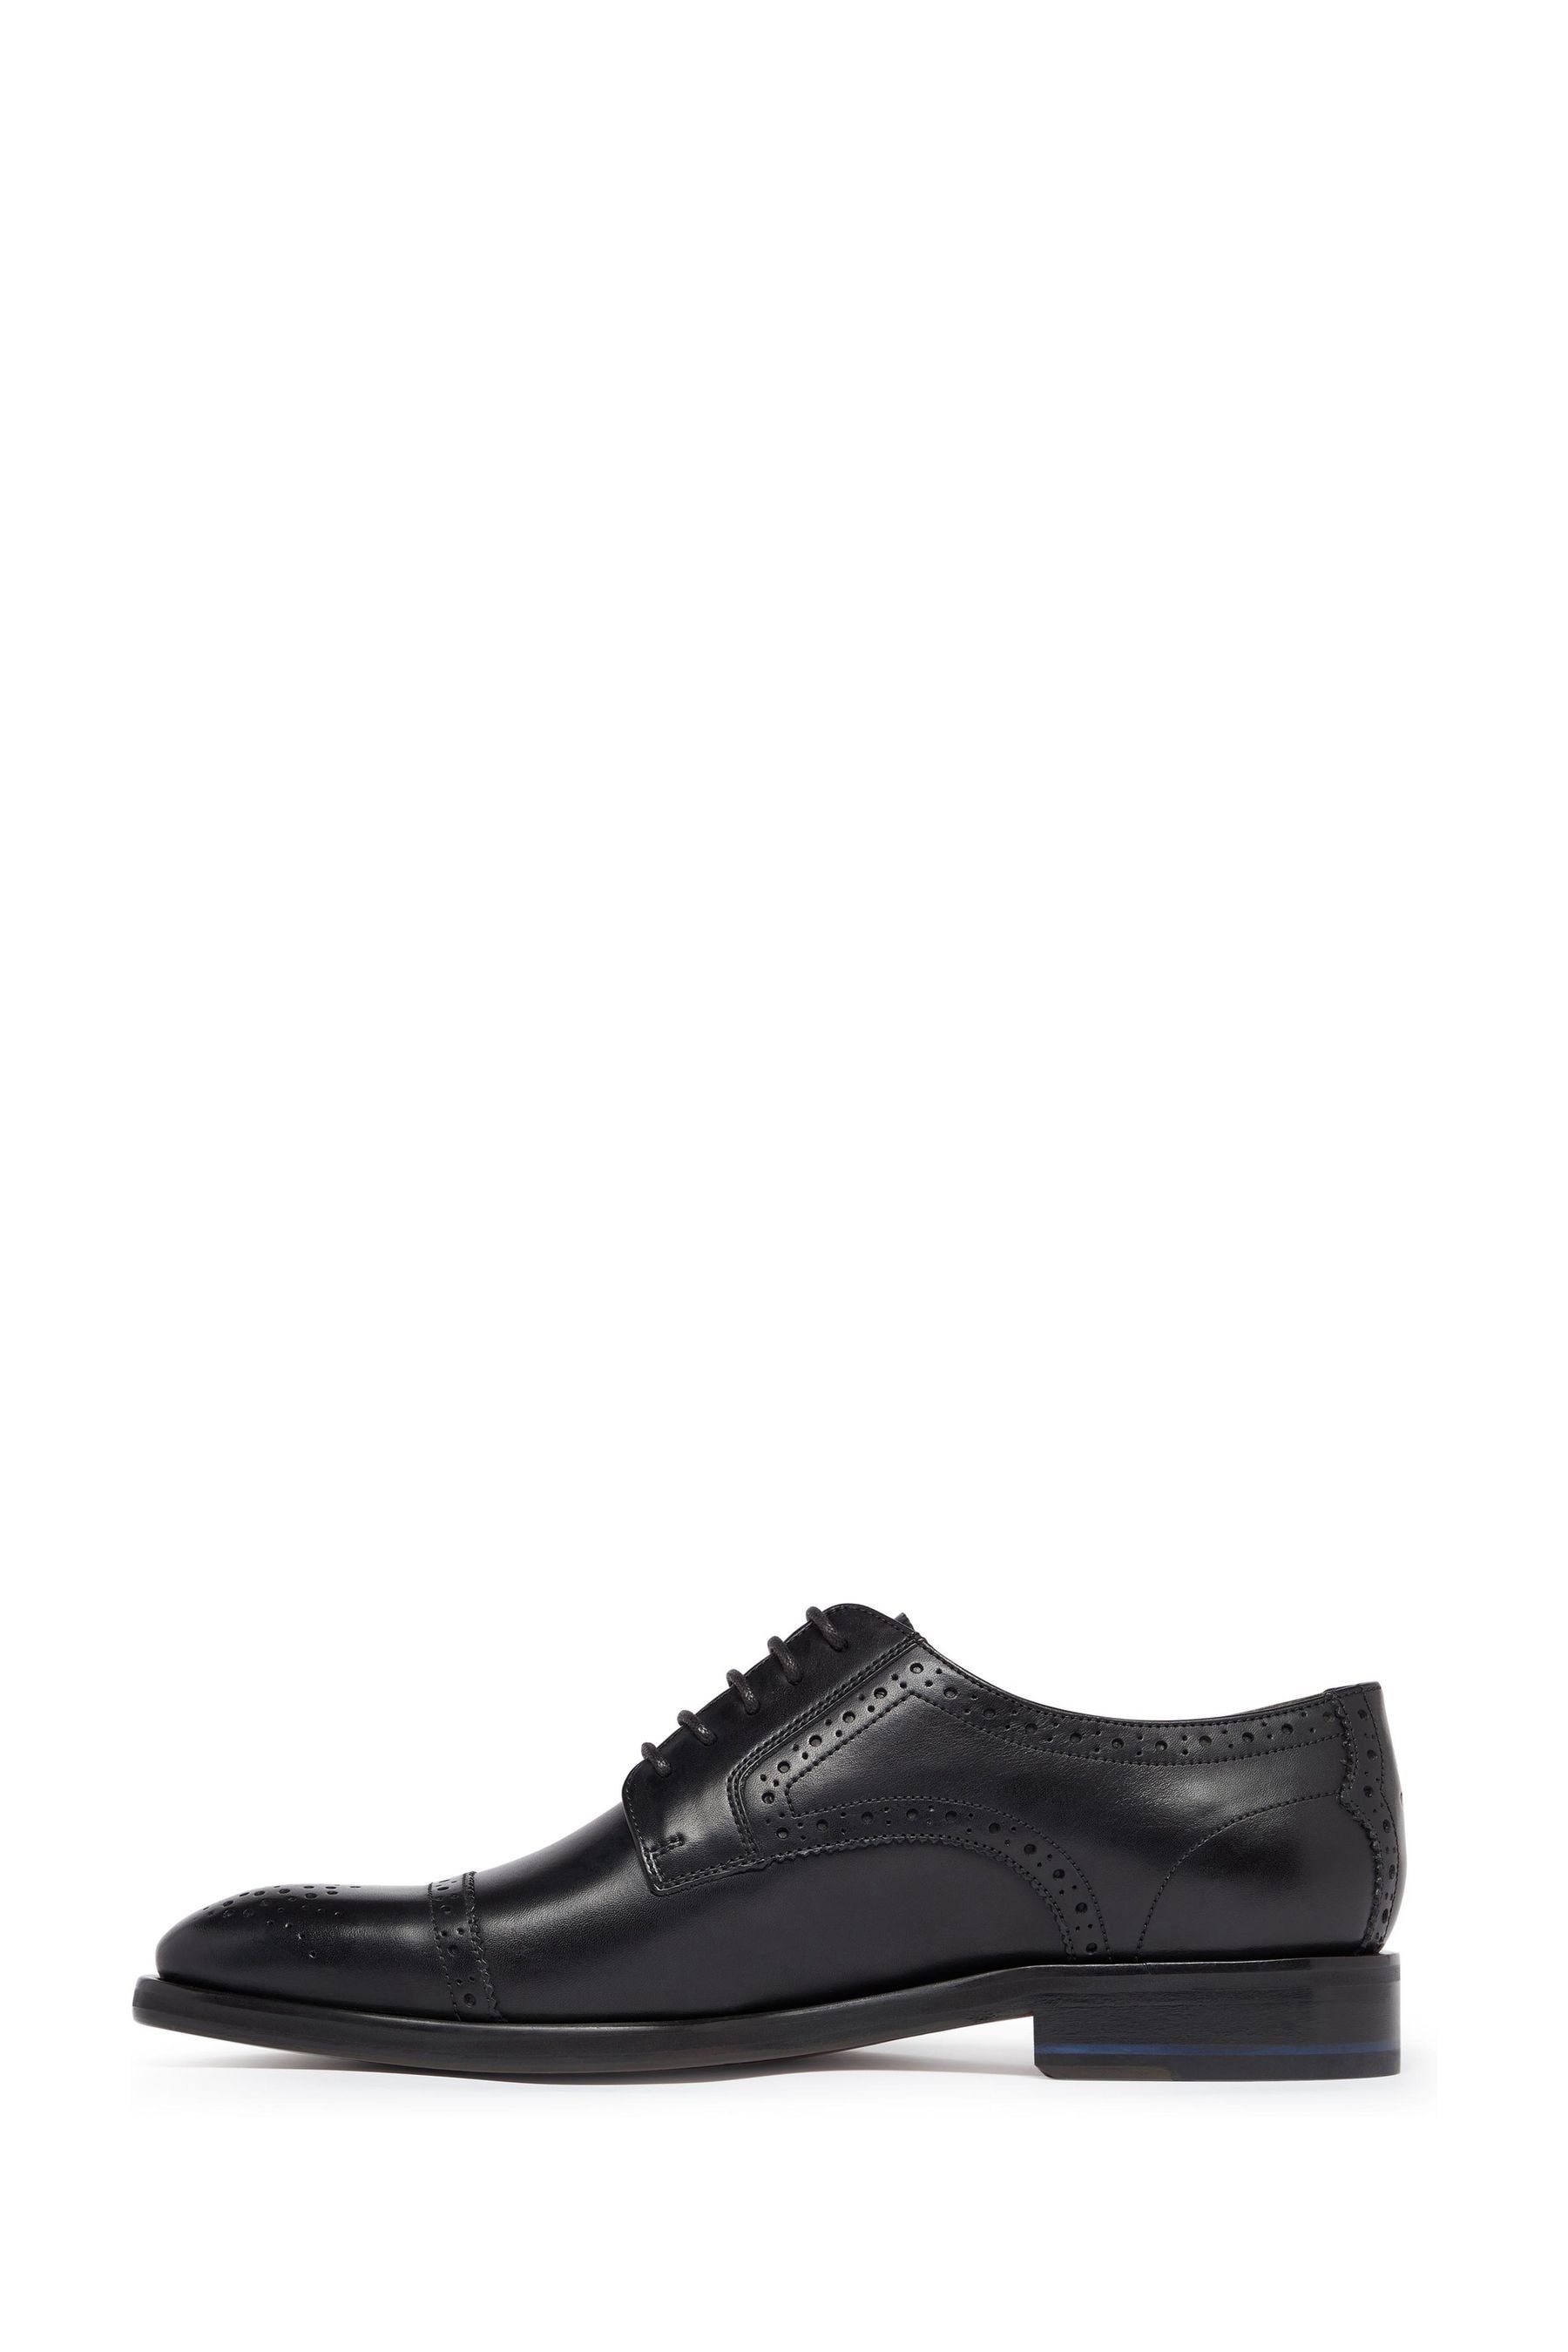 Buy Oliver Sweeney Black Bridgford Polished Leather Derby Brogues from ...